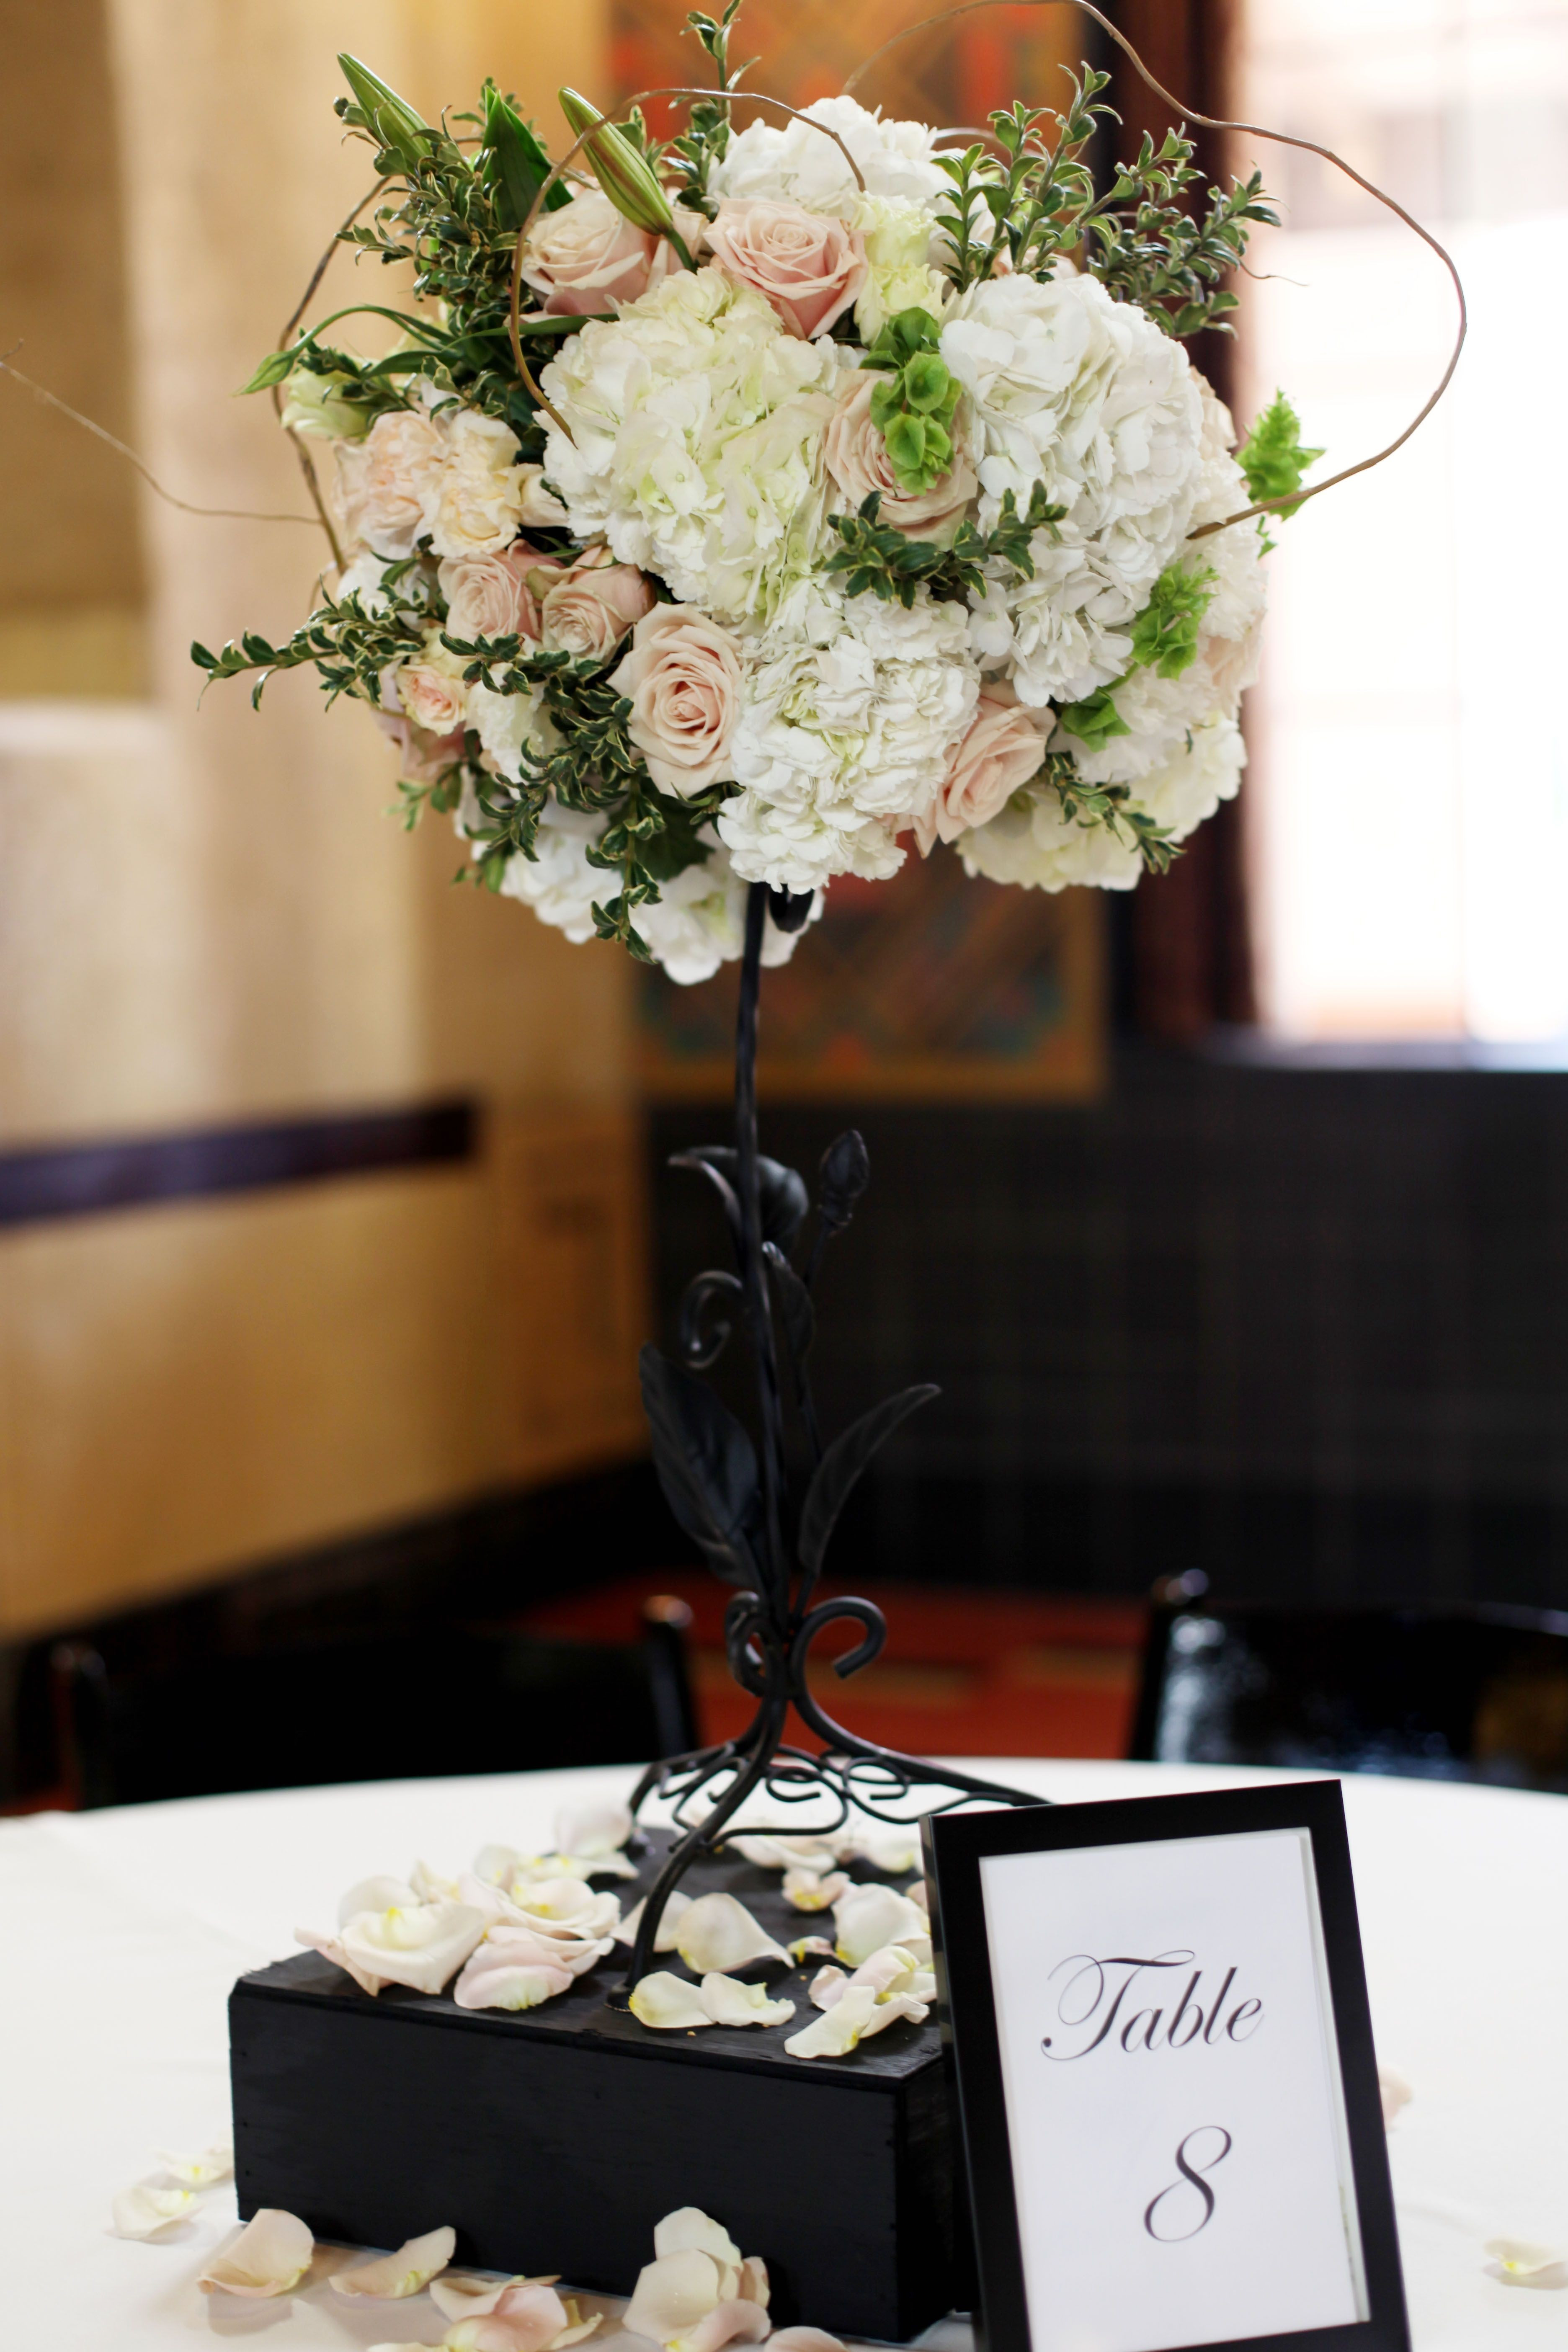 artificial flower arrangements in floor vases of decorative branches for weddings awesome tall vase centerpiece ideas in decorative branches for weddings luxury union station the little branch of decorative branches for weddings decorative